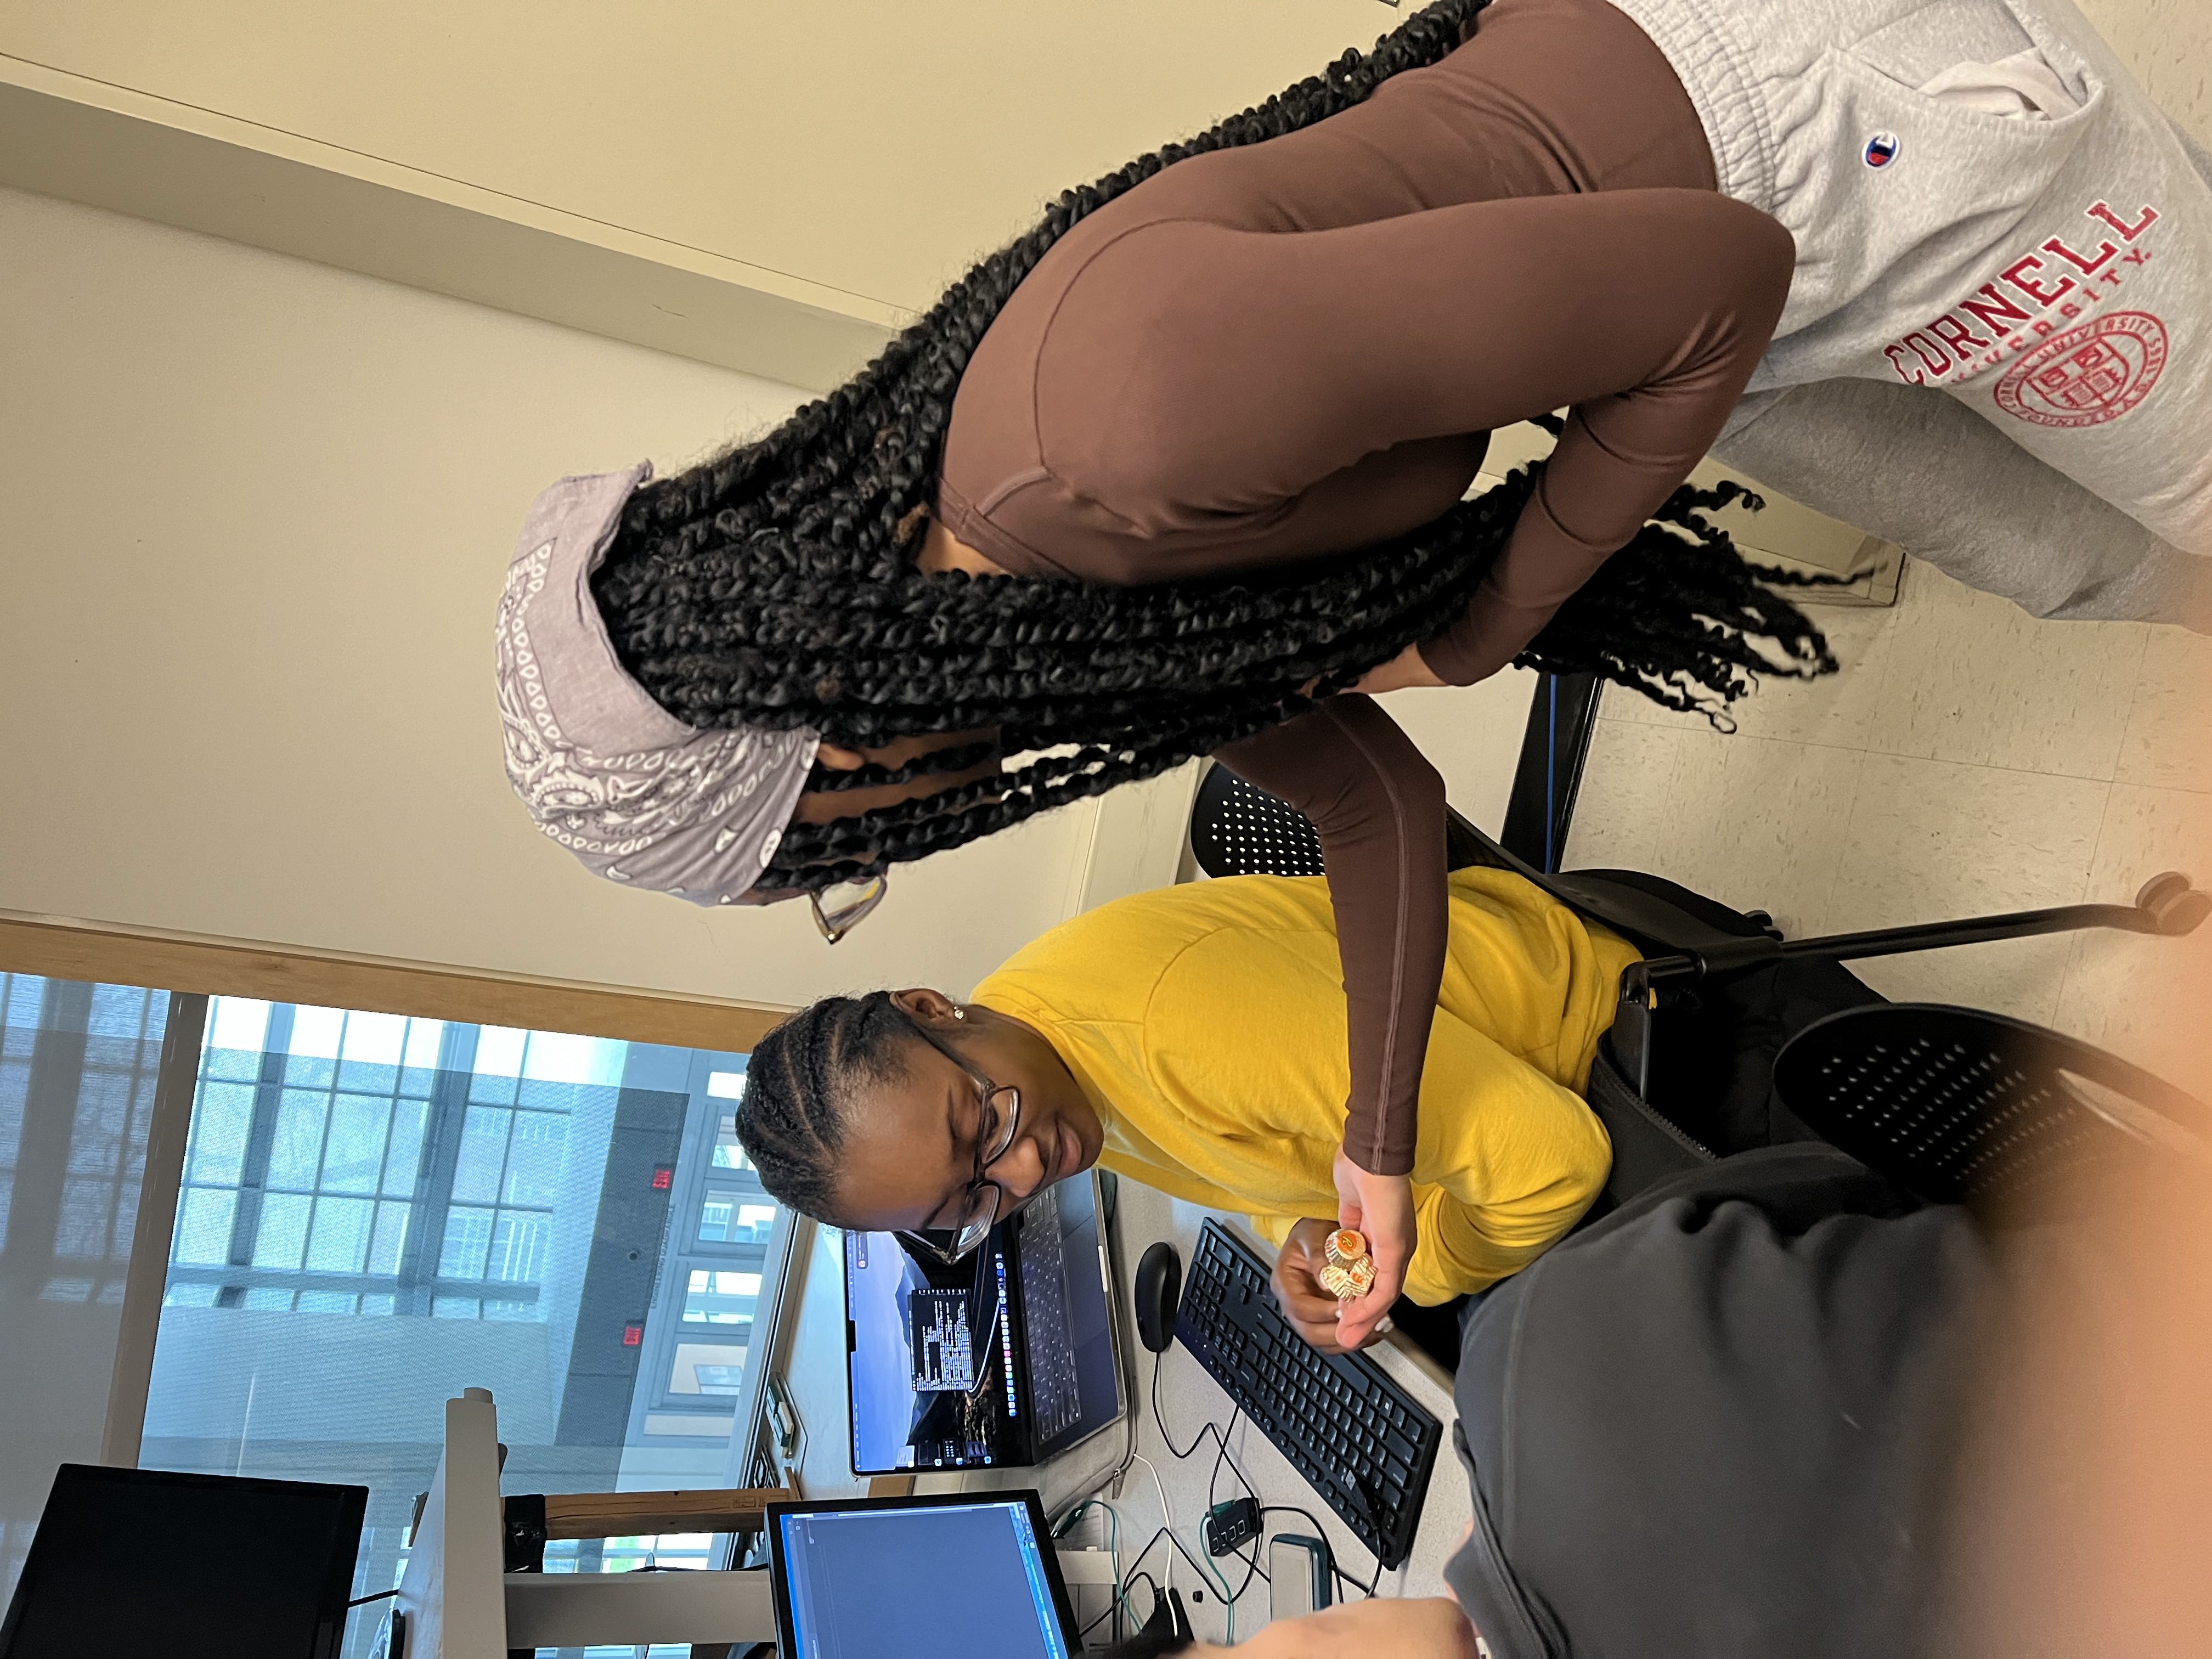 This image slider contains images of NSBE-CU's Sweet Tools for Success Event. The first image of this slider depicts one NSBE member handing another member a handful of sweets.